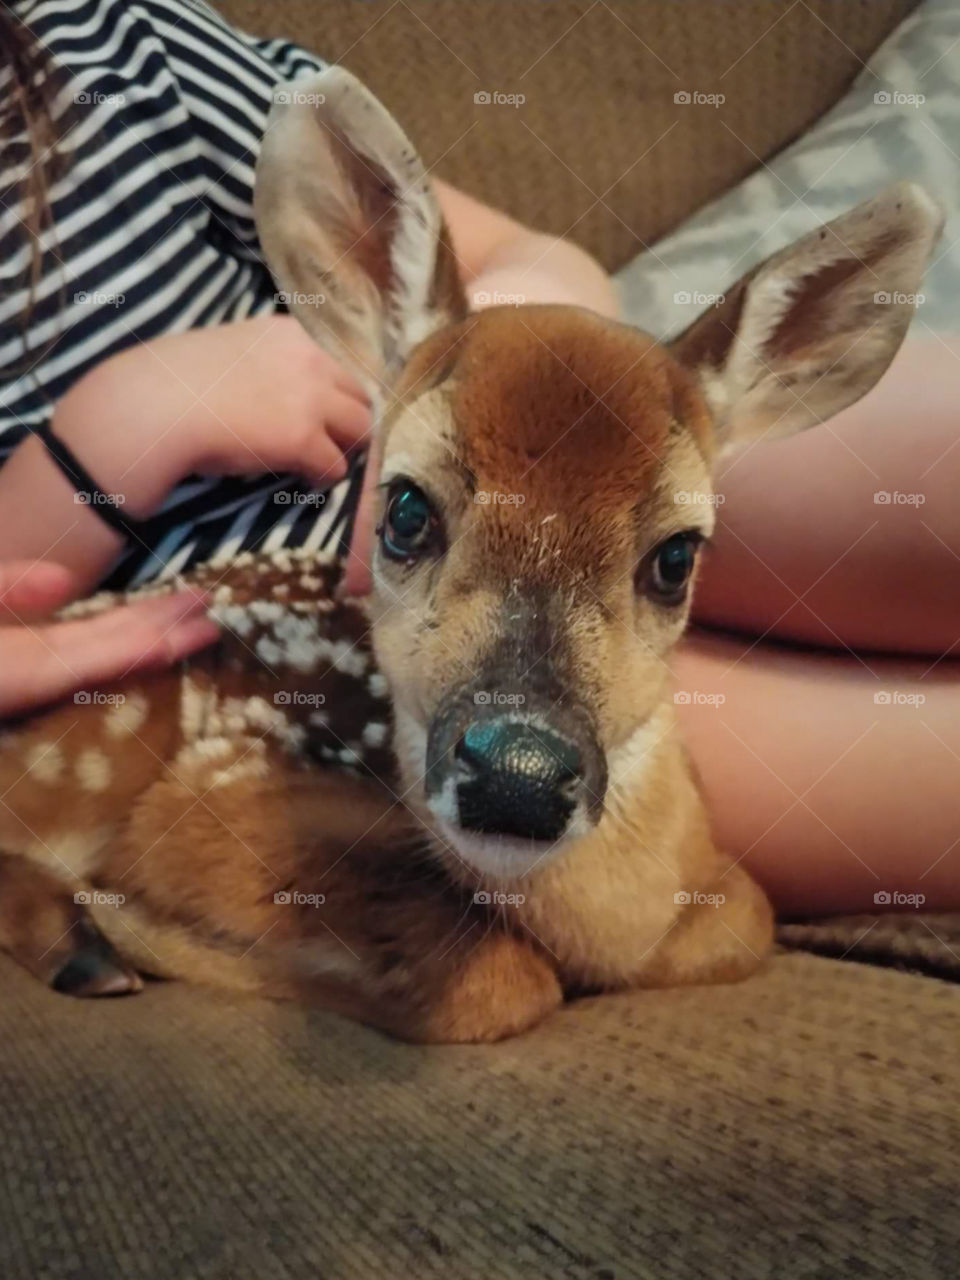 Baby Deer fawn who was rescued lounging on the couch with children